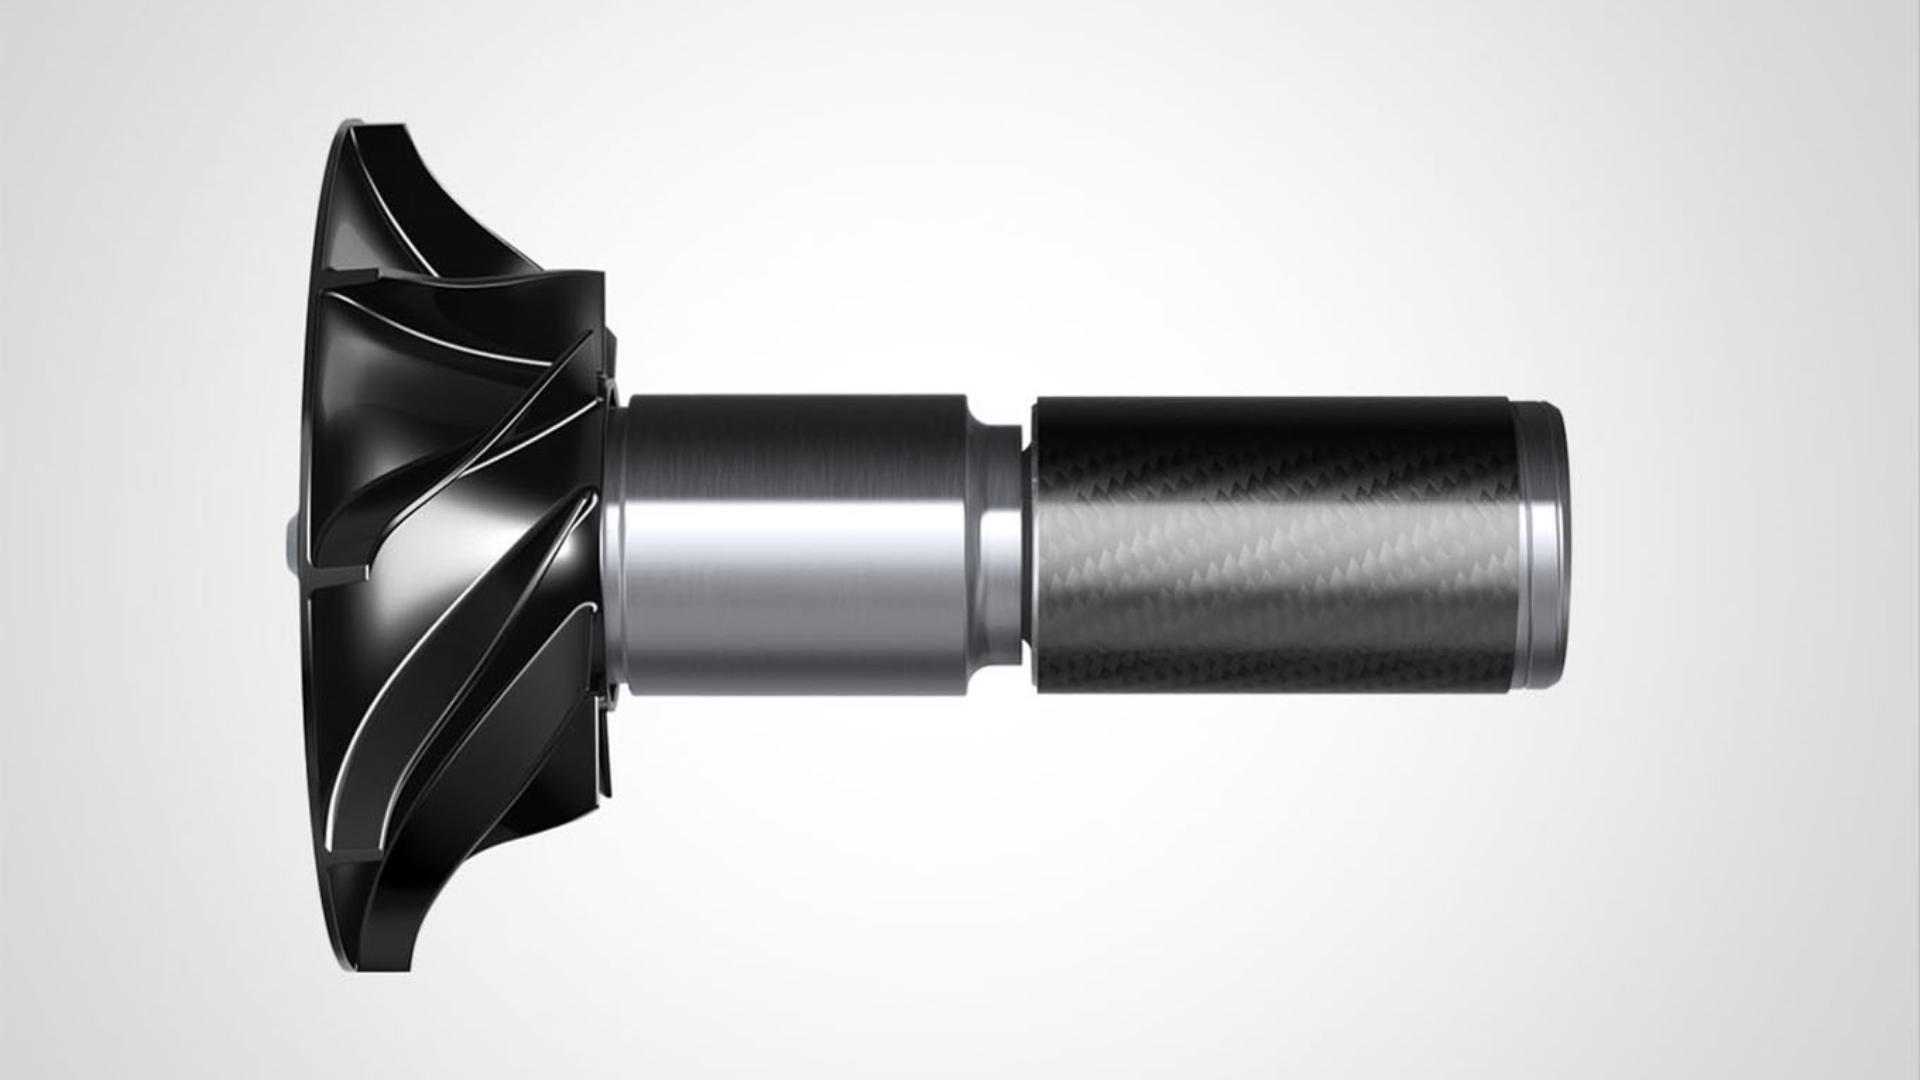 The Dyson digital motor V4 on its own, outside of the machine.